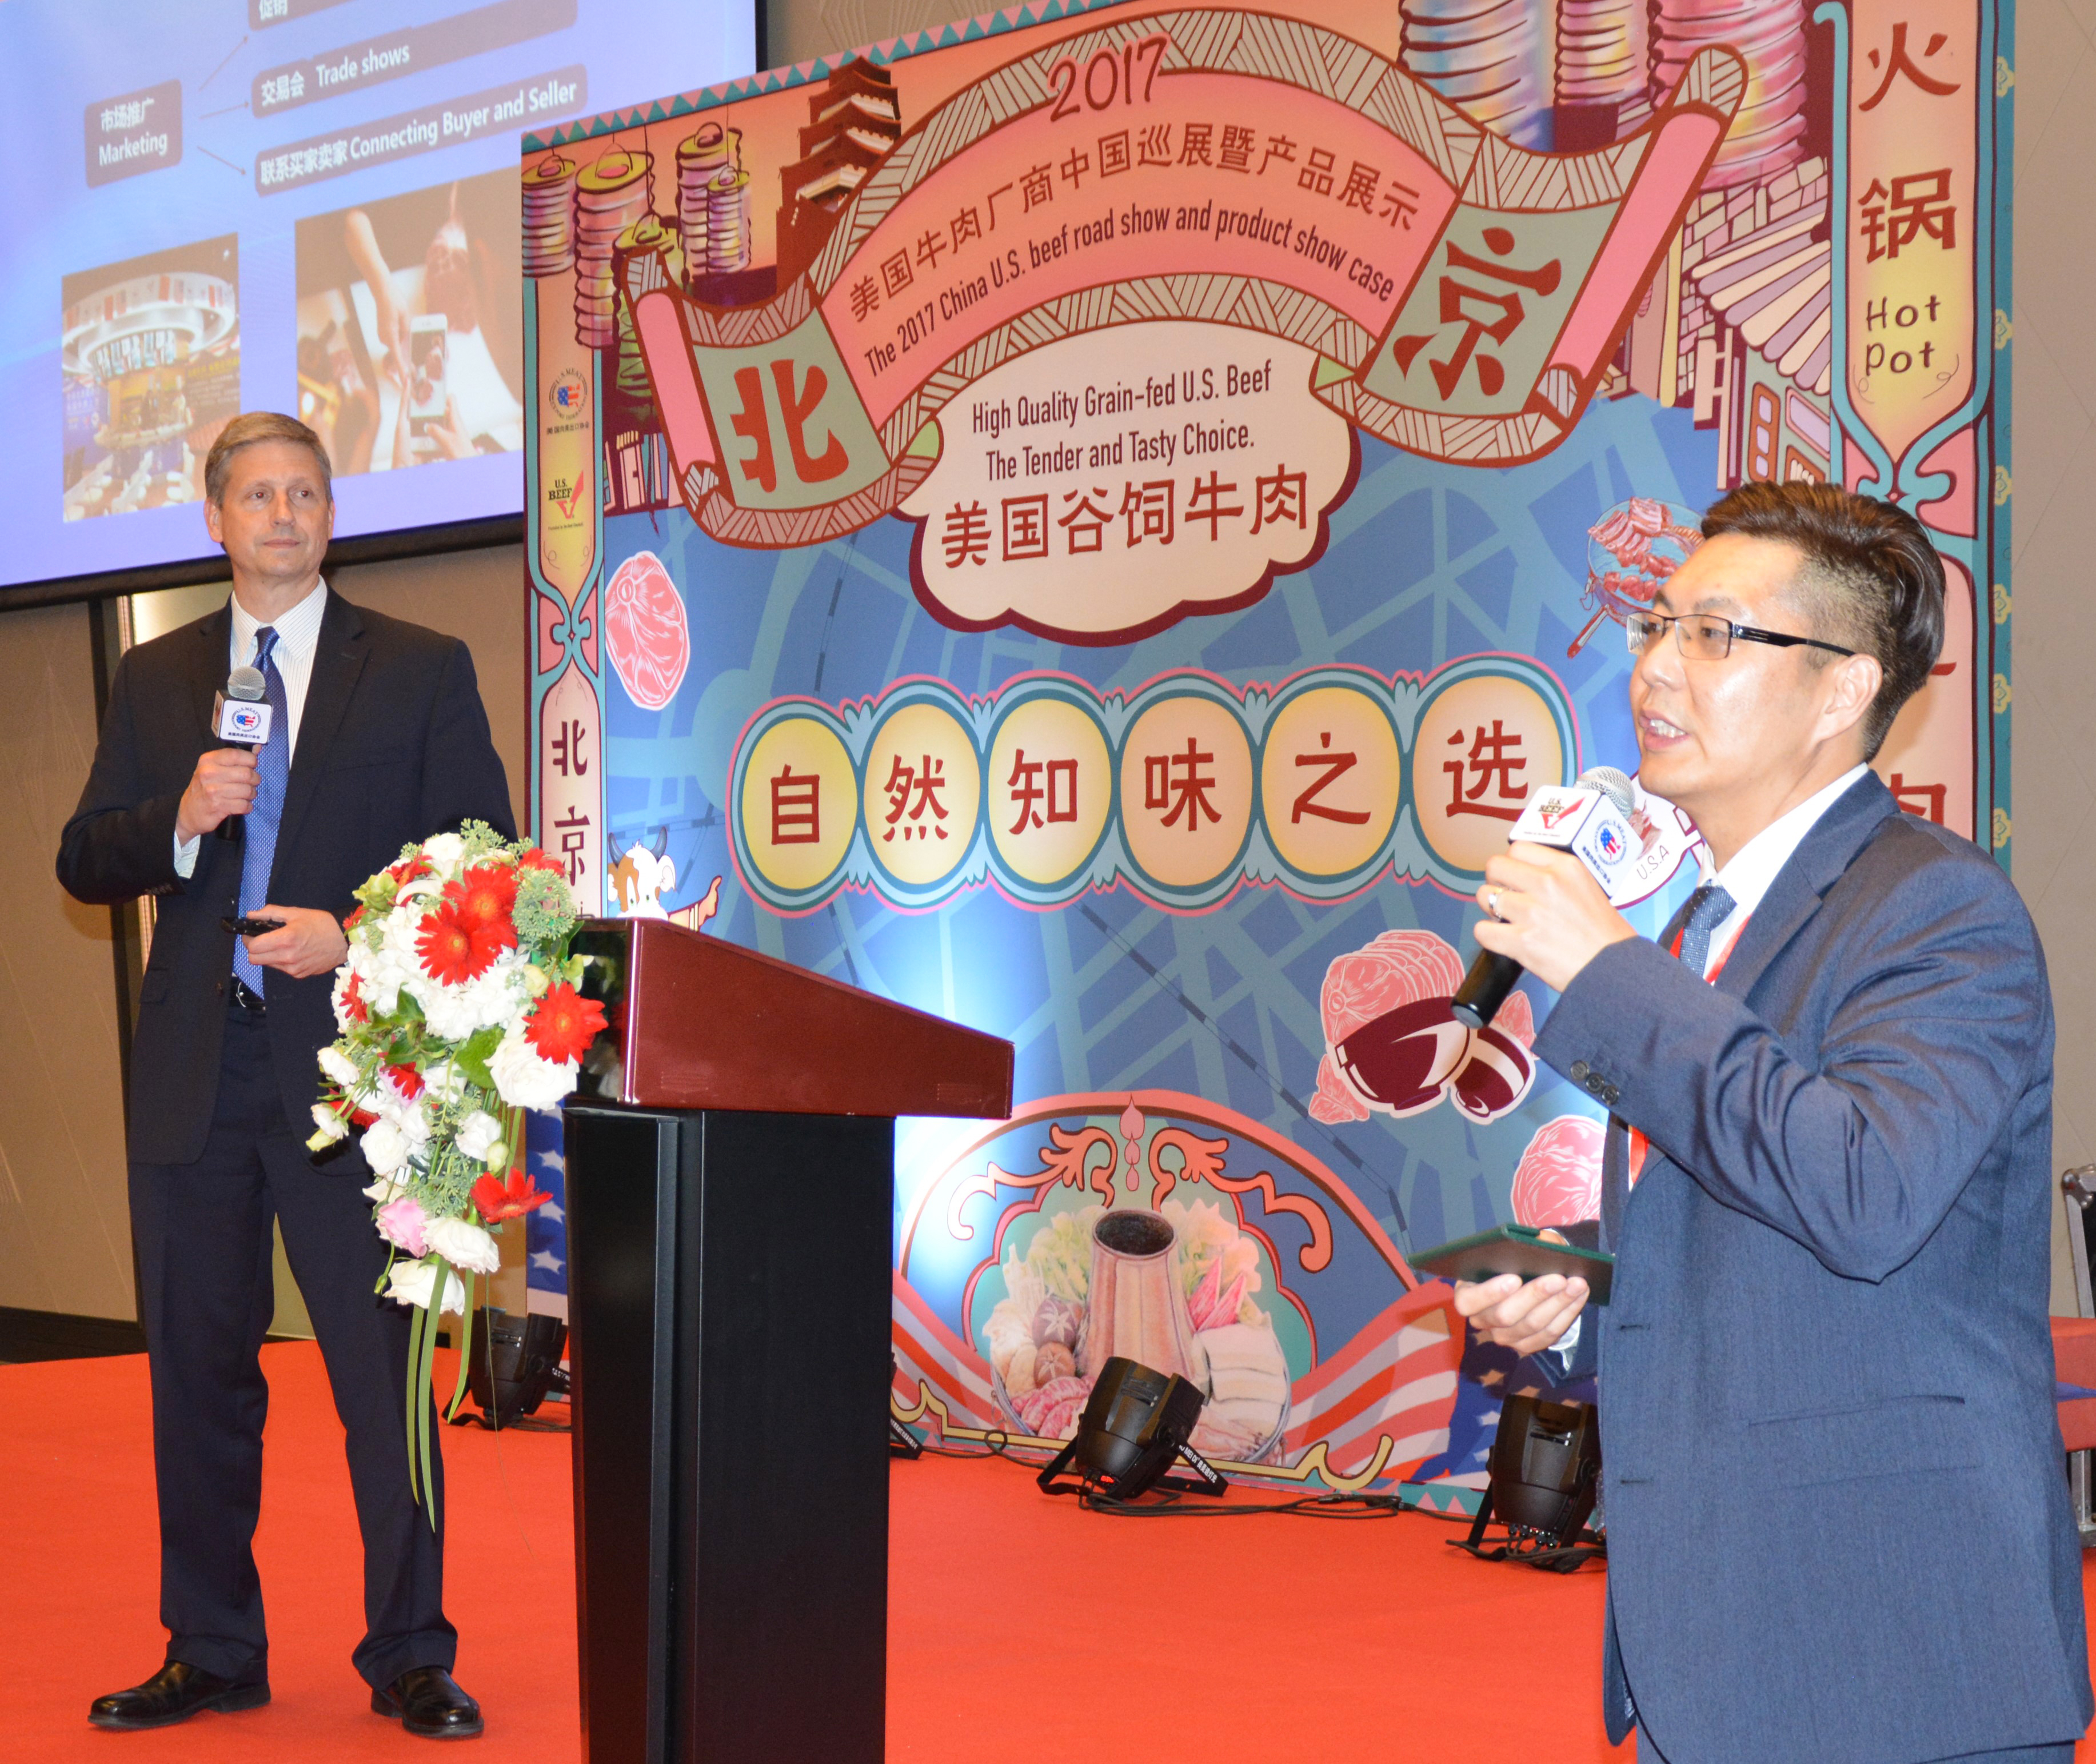 US Meat Export Federation Pulls Off US Beef Roadshow Exhibitions in China with Great Success